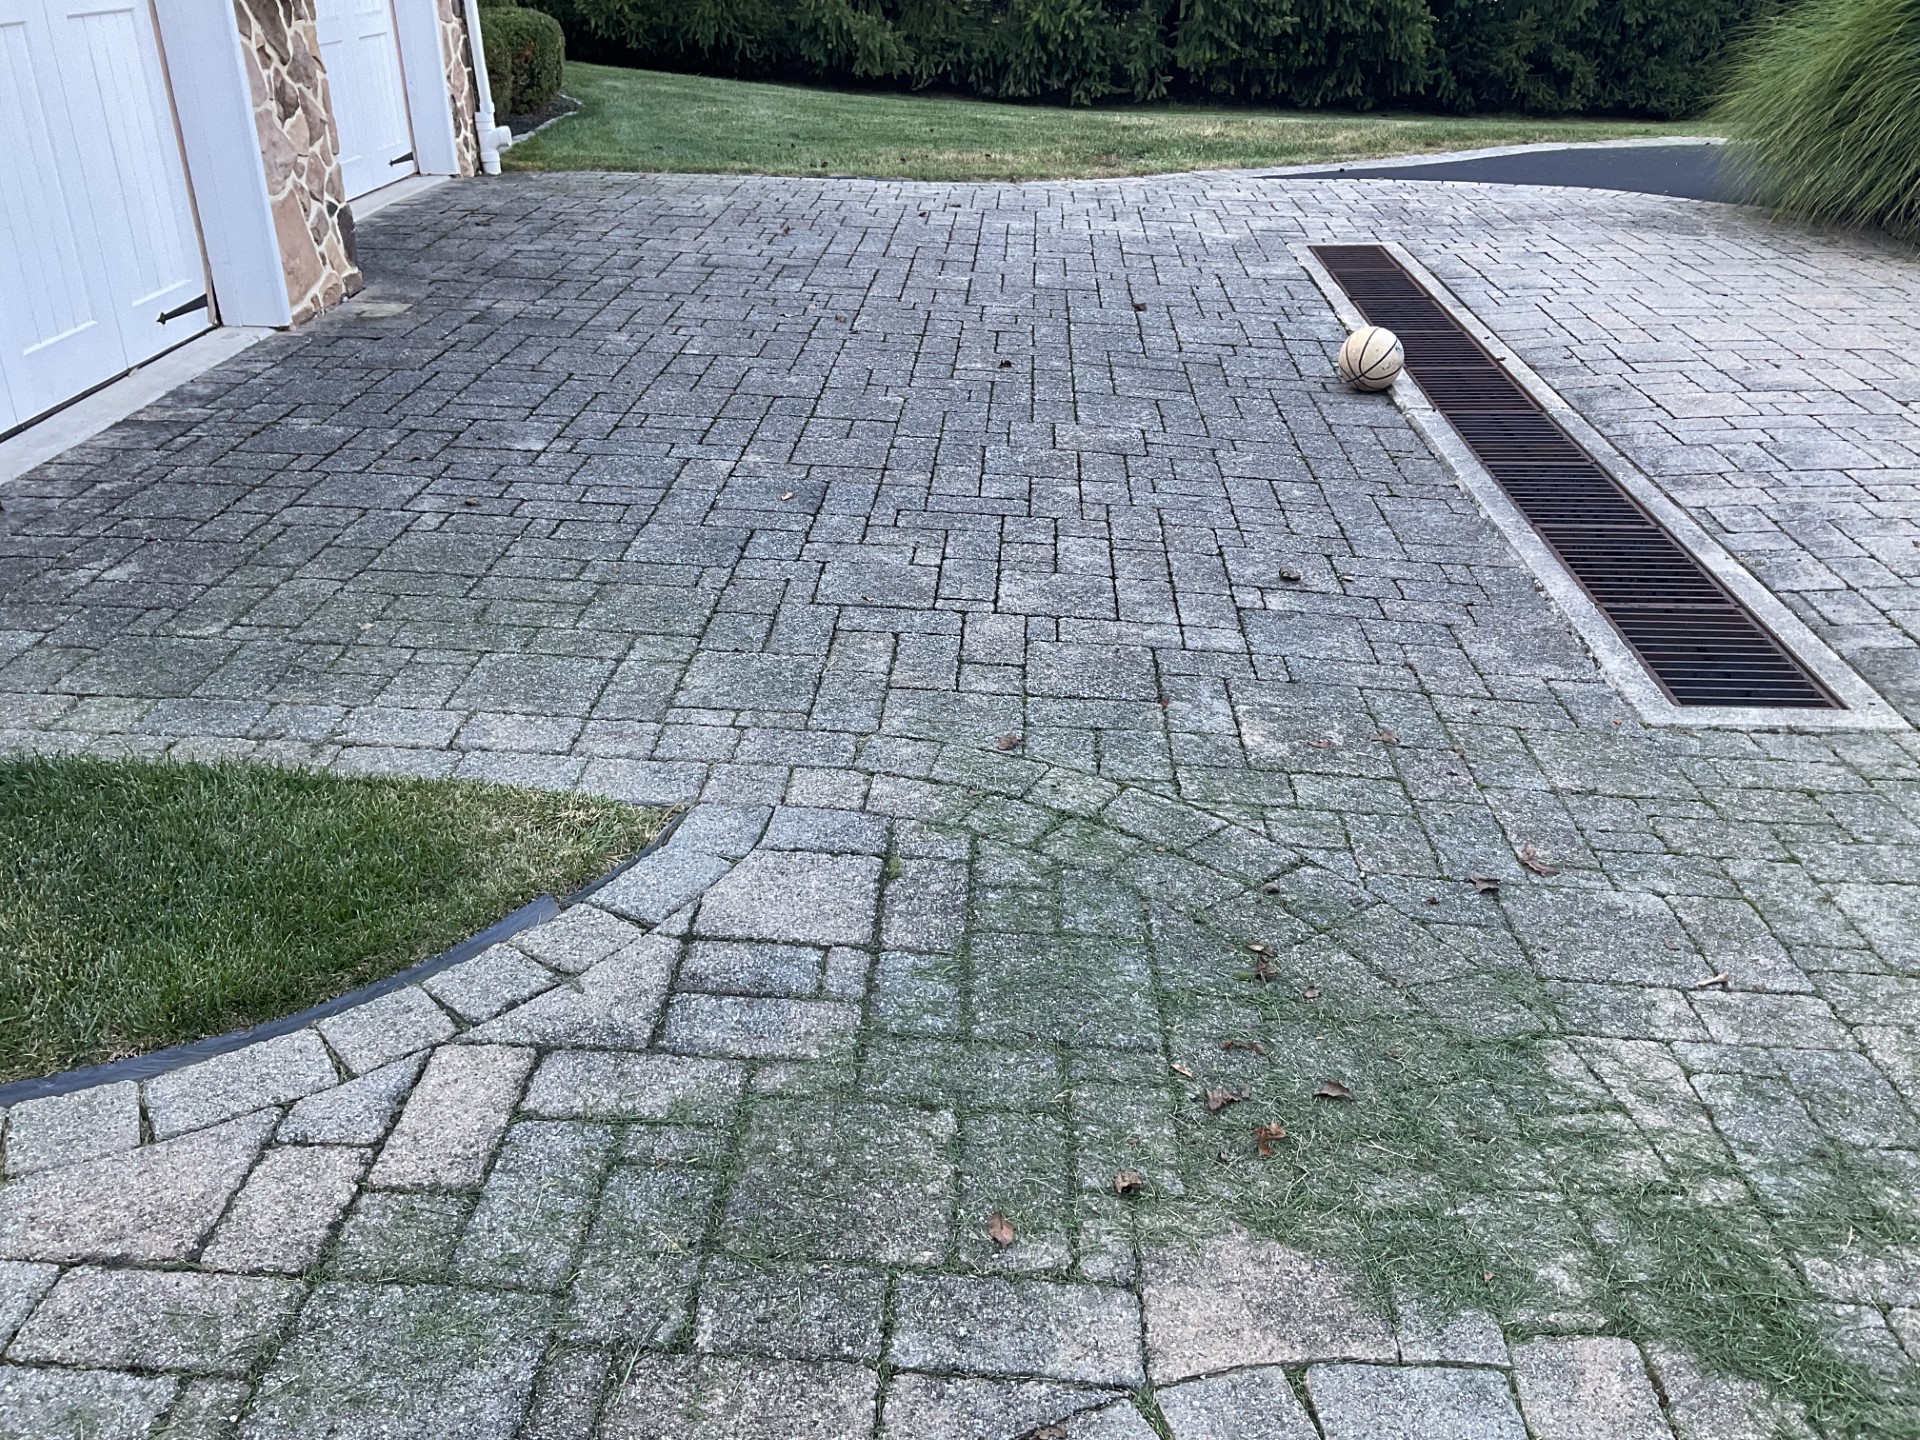 A Brick Driveway With A Round Object On The Ground